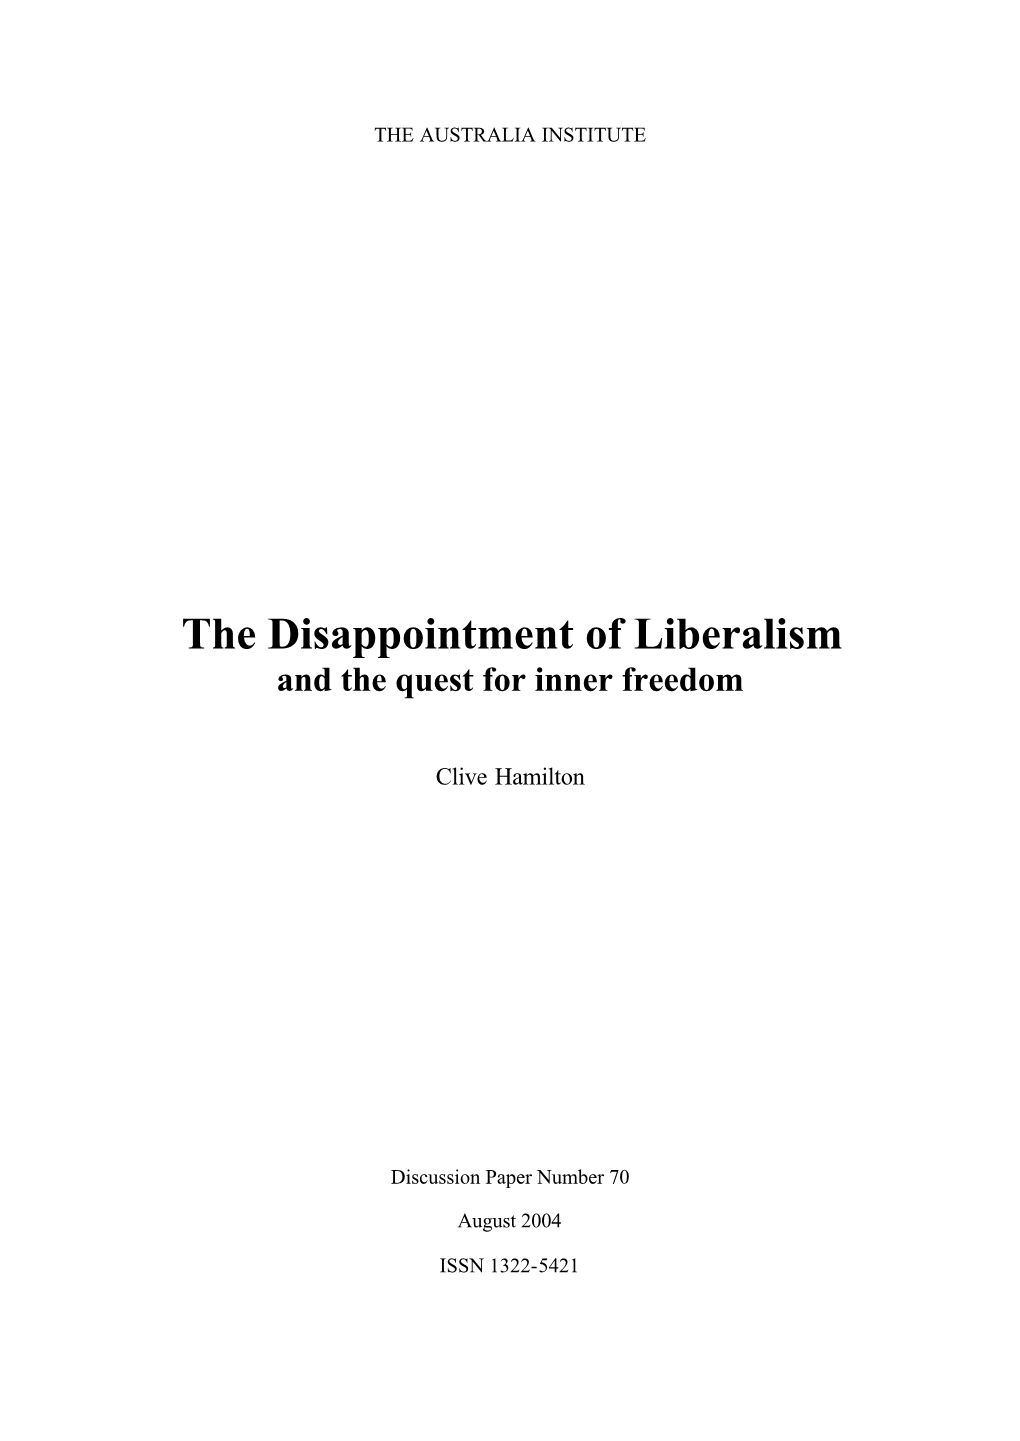 The Disappointment of Liberalism and the Quest for Inner Freedom